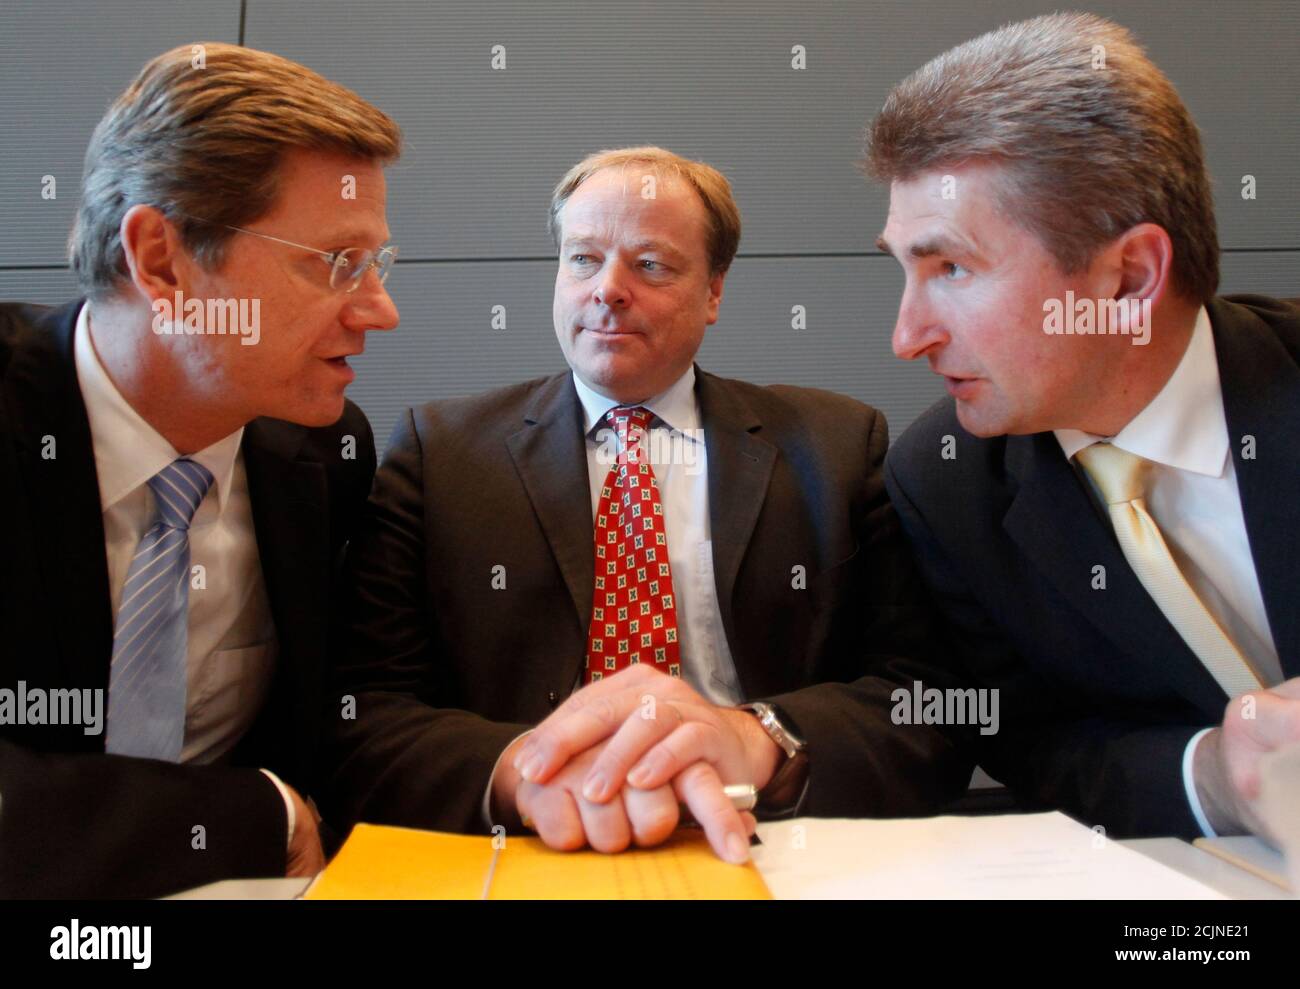 Leader of the Free Democrats Party (FDP) Guido Westerwelle (L) talks with general secretary Dirk Niebel and deputy party leader Andreas Pinkwart (R) before a FDP parliamentary group meeting in Berlin October 20, 2009.  REUTERS/Thomas Peter (GERMANY POLITICS IMAGES OF THE DAY) Stock Photo